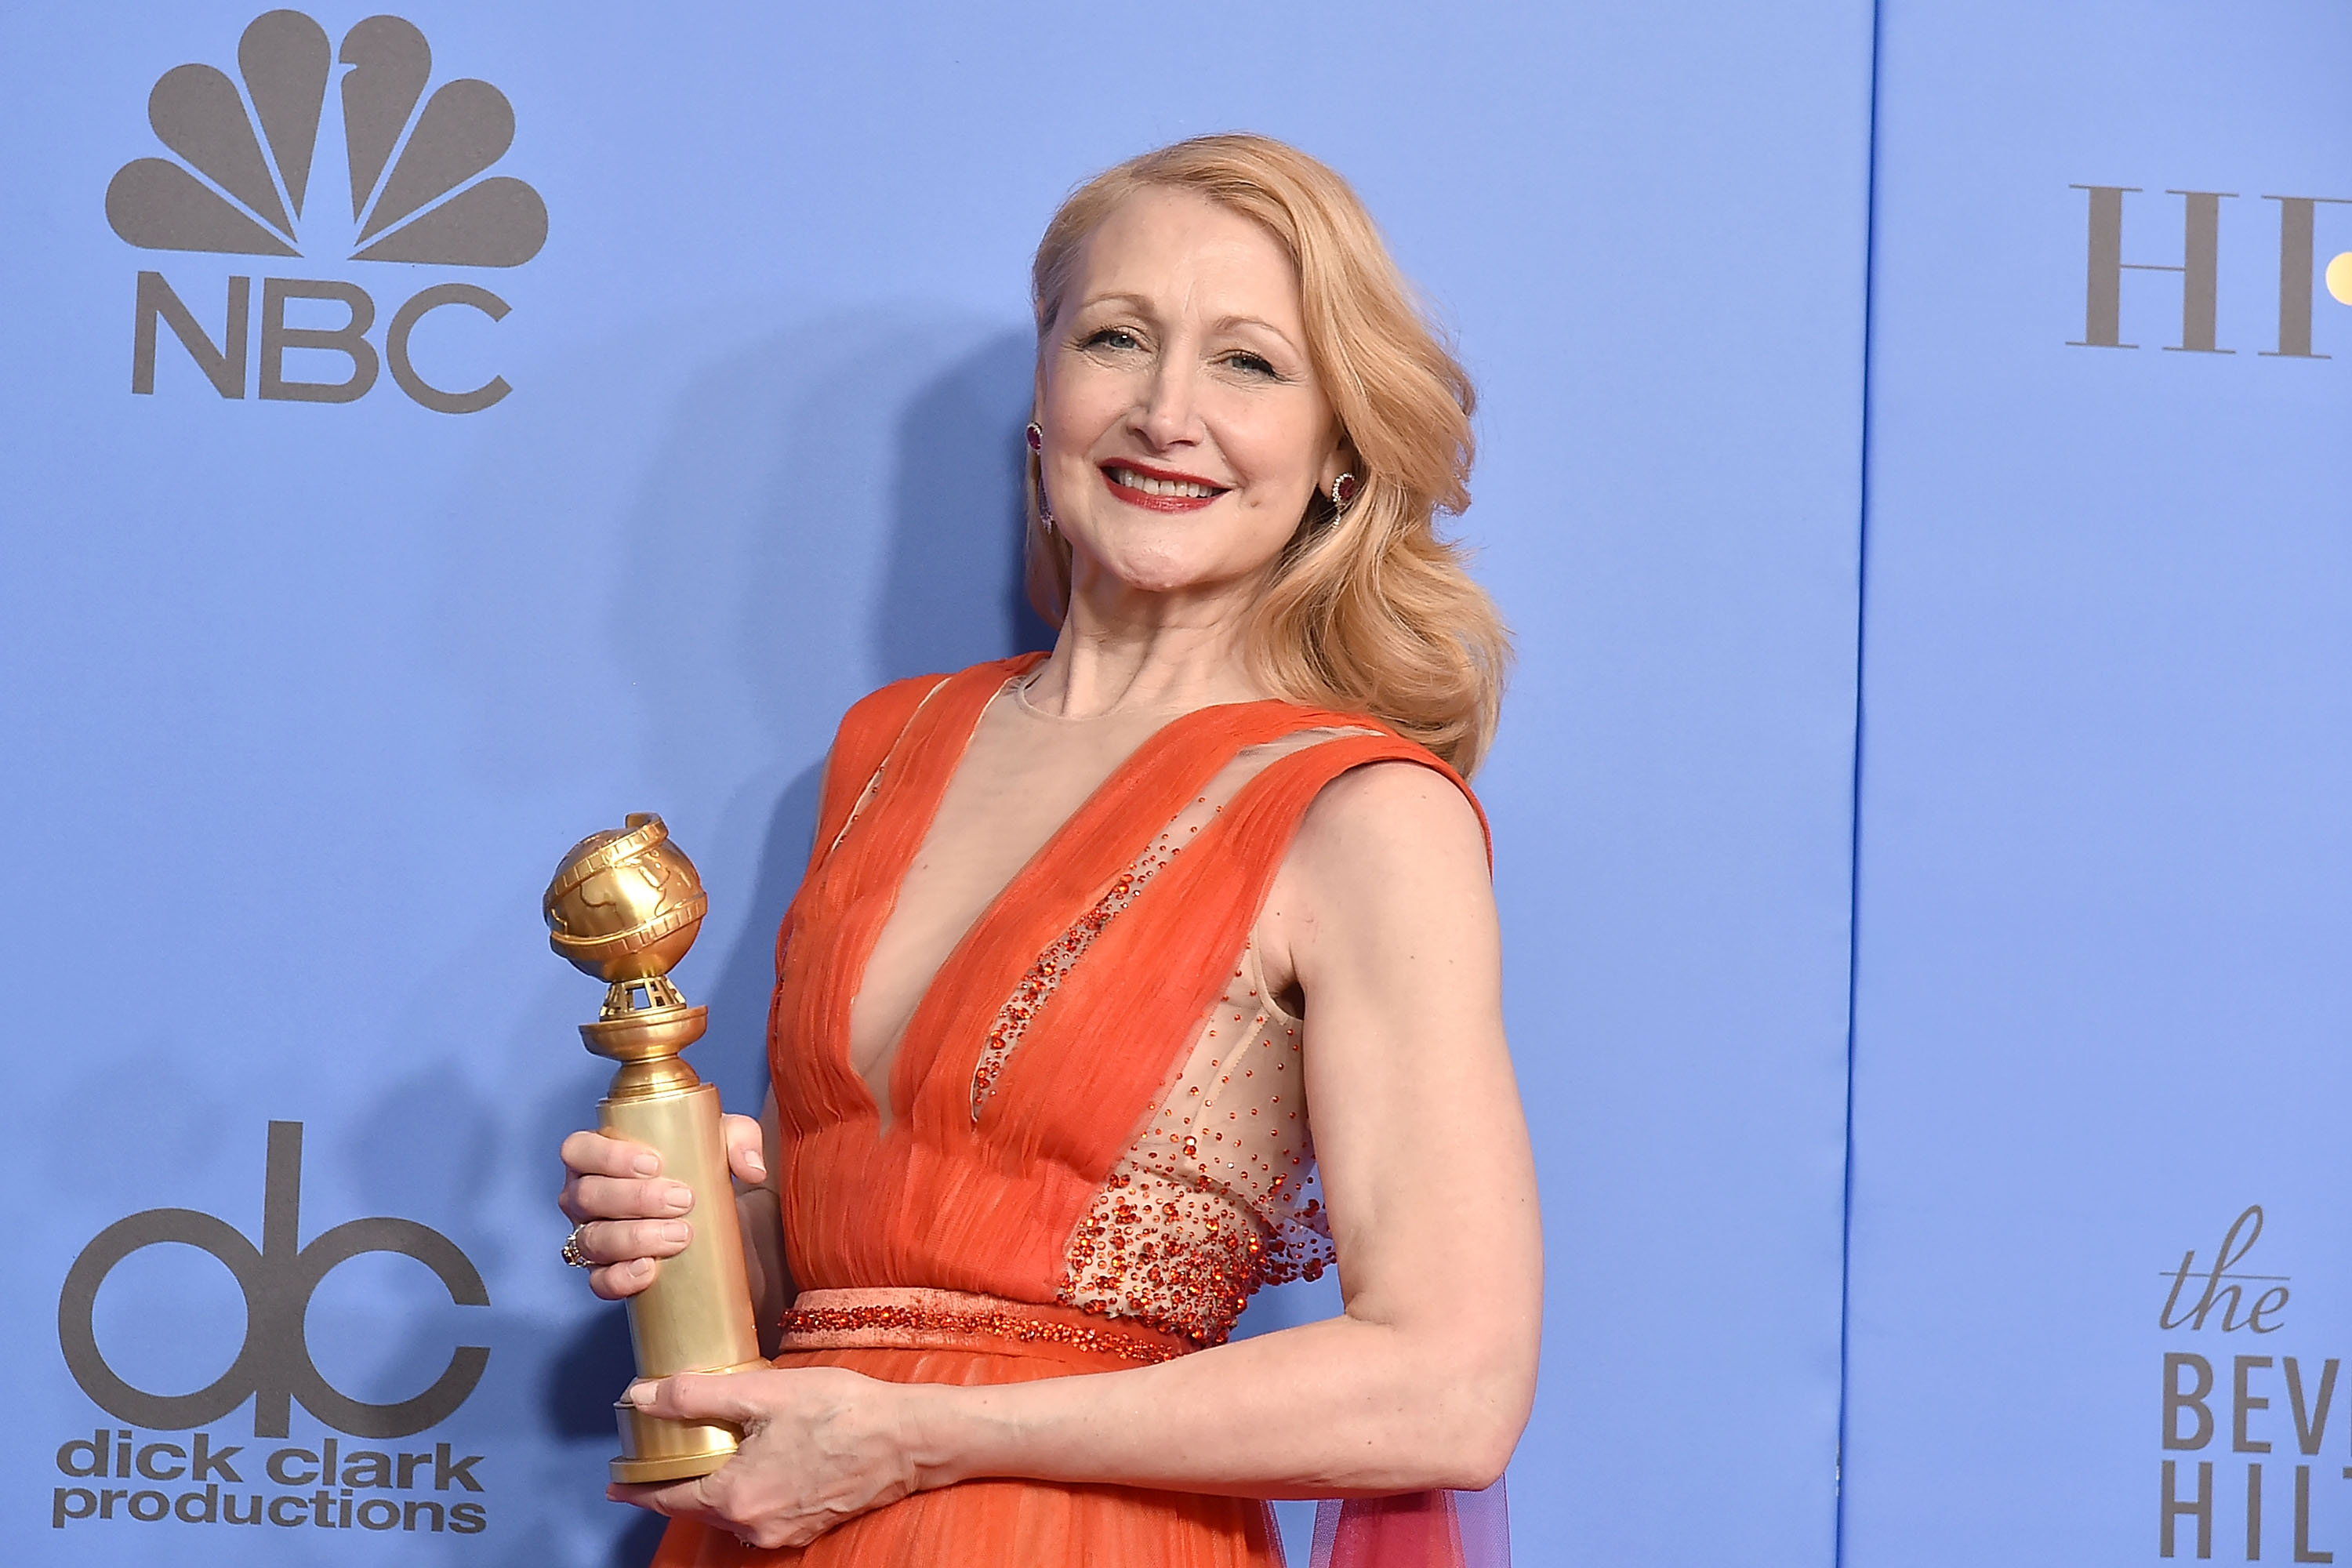 Patricia clarkson images